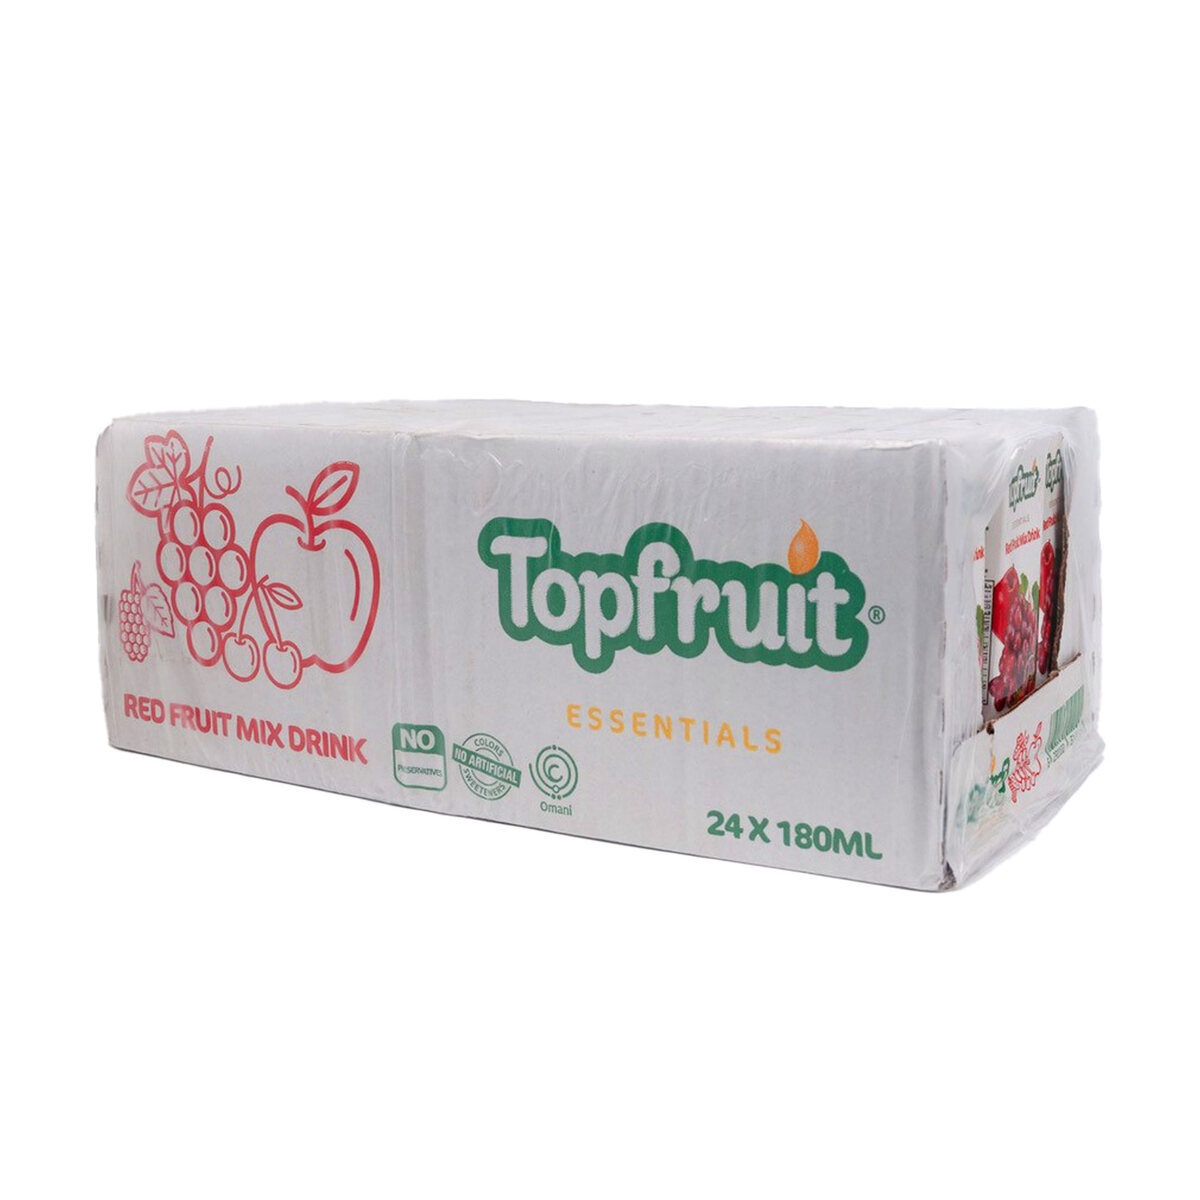 Top Fruit Red Fruit Mix Drink 180 ml